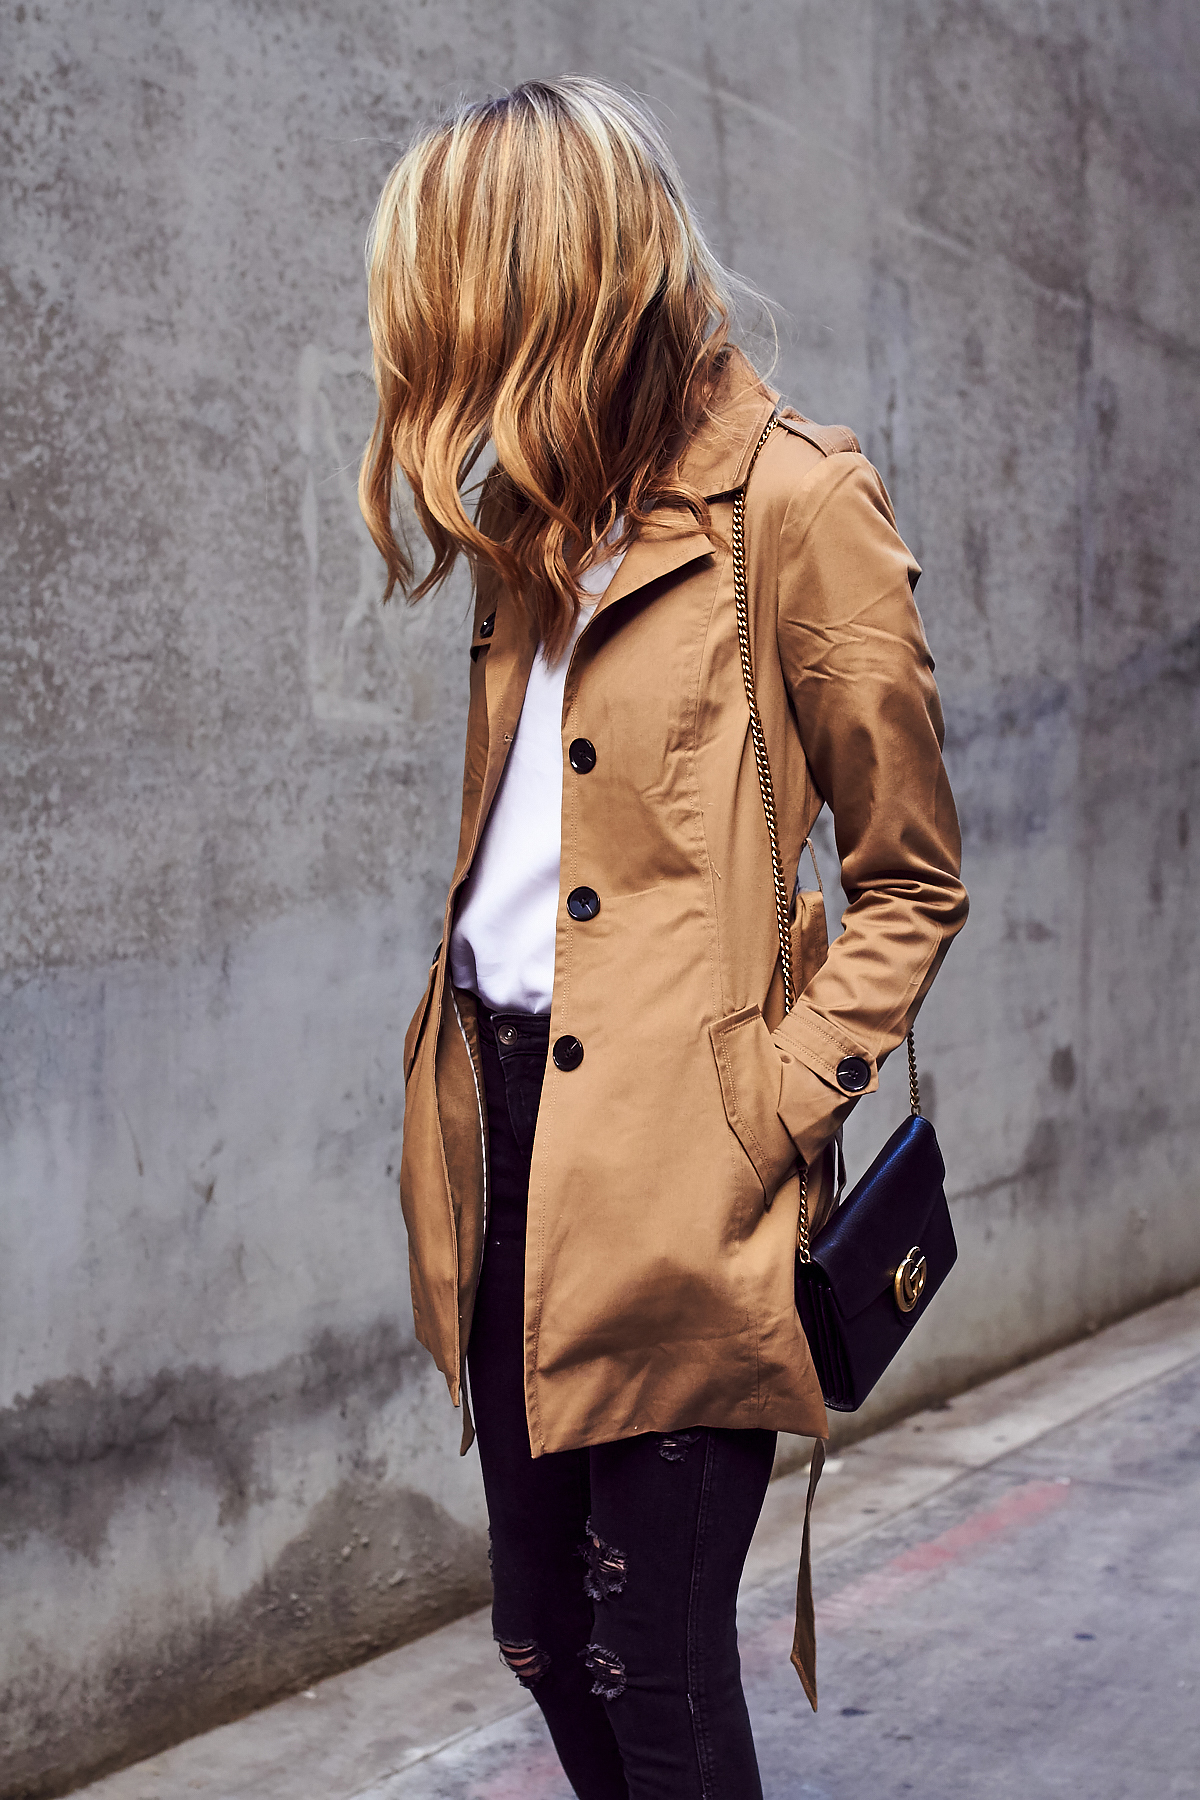 Fall Outfit, Spring Outfit, Trench Coat, Black Ripped Skinny Jeans, Gucci Marmont Handbag